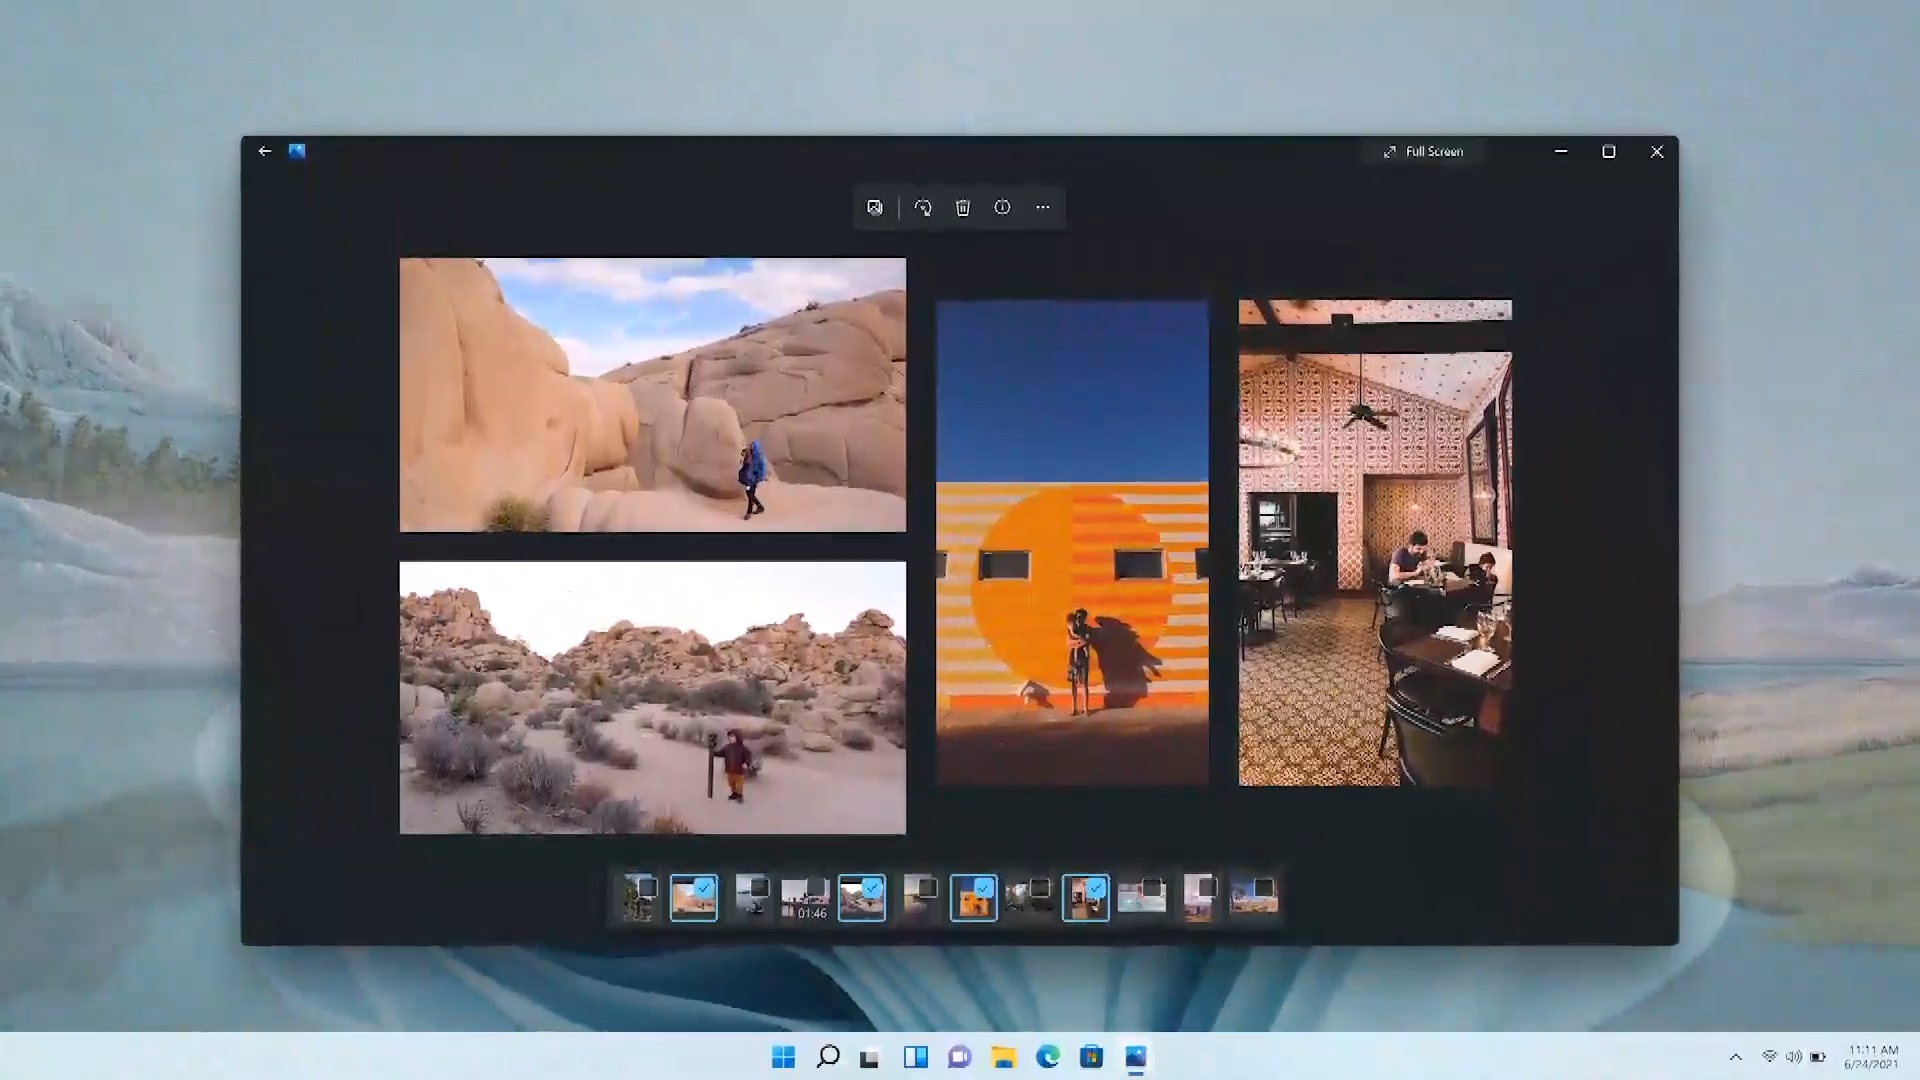 Windows 11 comes with a new Microsoft Photos app - here's our first look